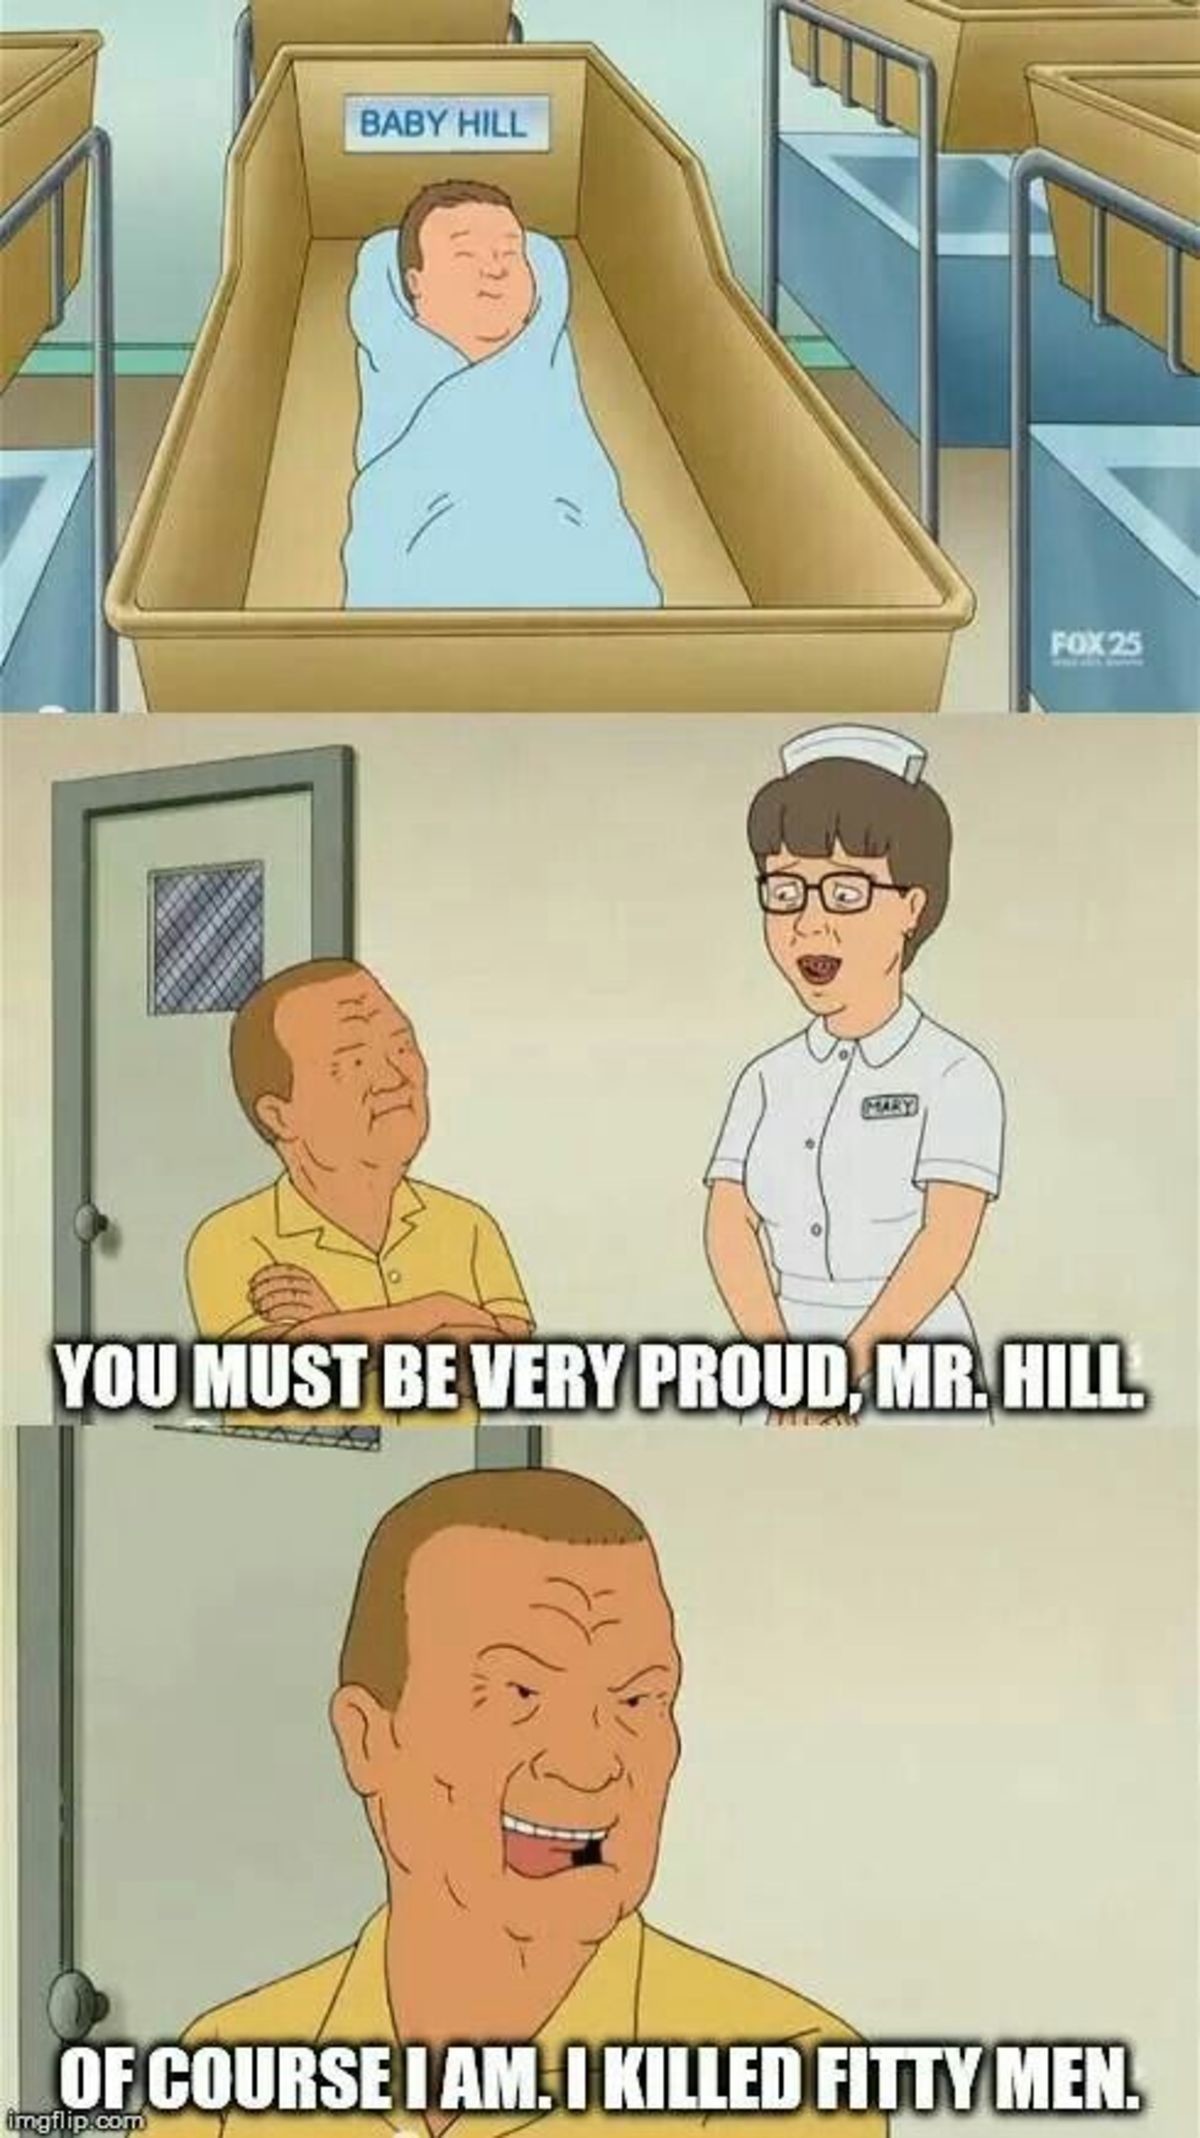 king of the hill baby meme - Baby Hill Fox 25 You Must Be Very Proud, Mr. Hill Of Course I Am. I Killed Fitty Men. imgflip.com